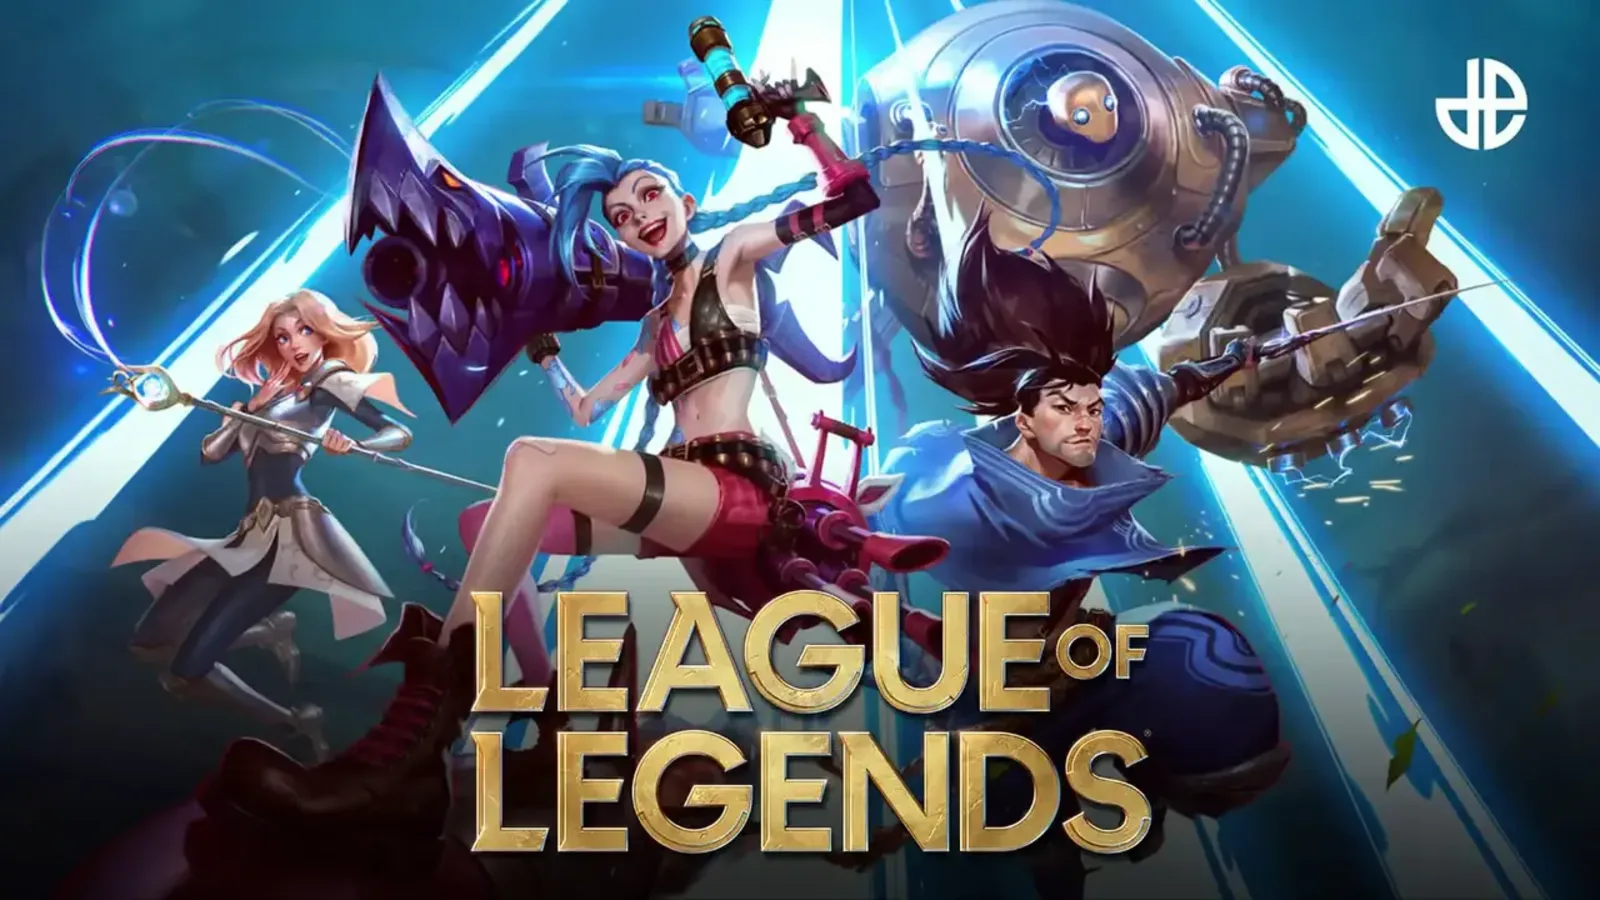 League of Legends Performance: Finding the Right PC